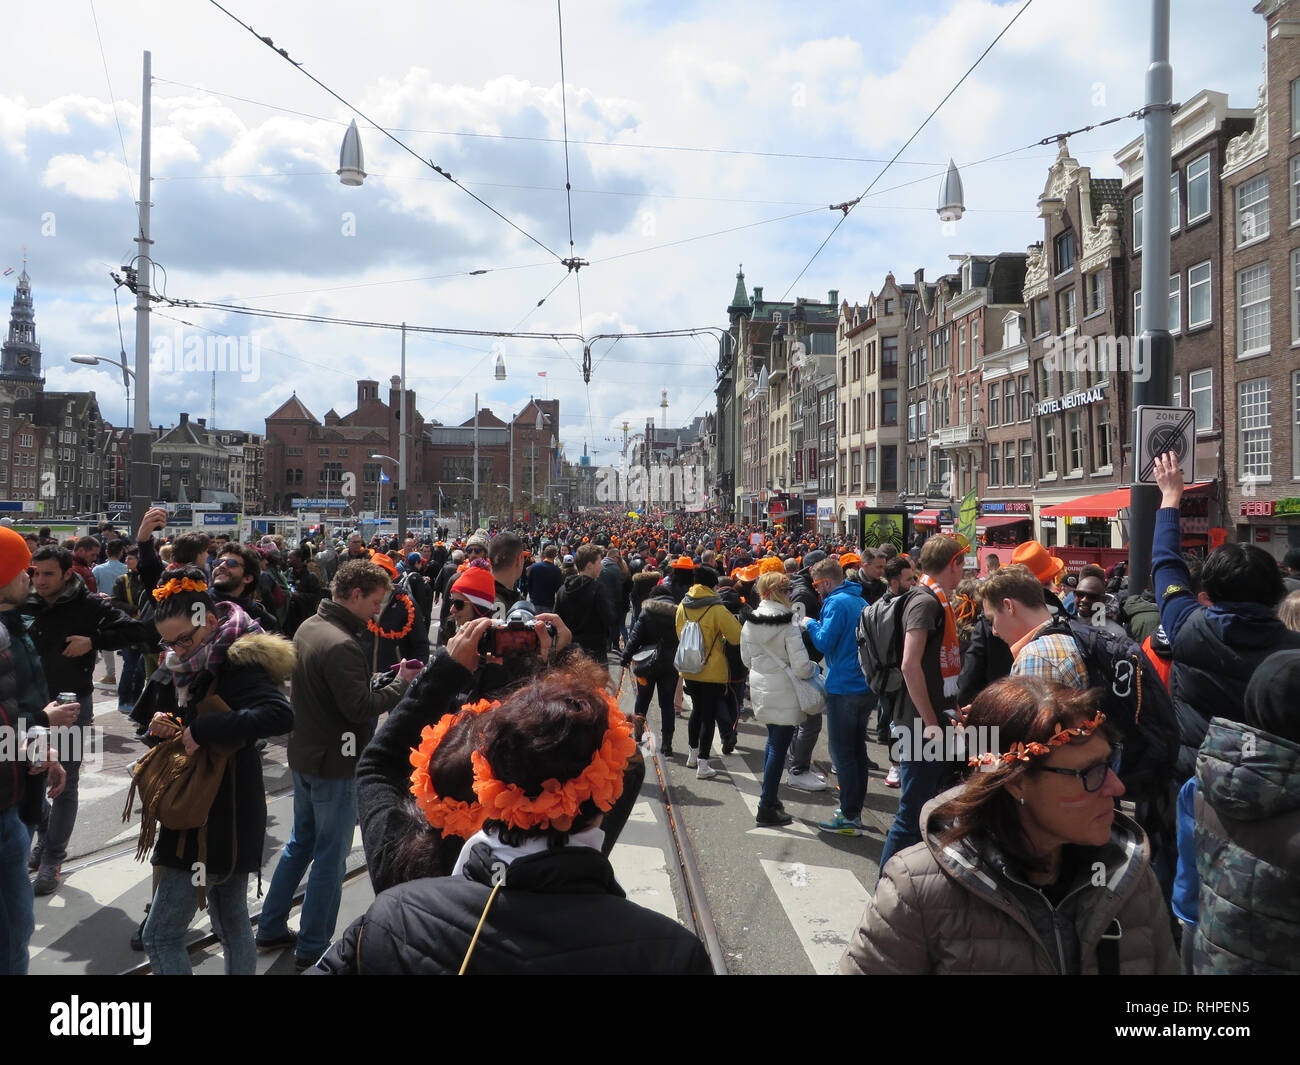 Festival crowd in the Netherlands Stock Photo